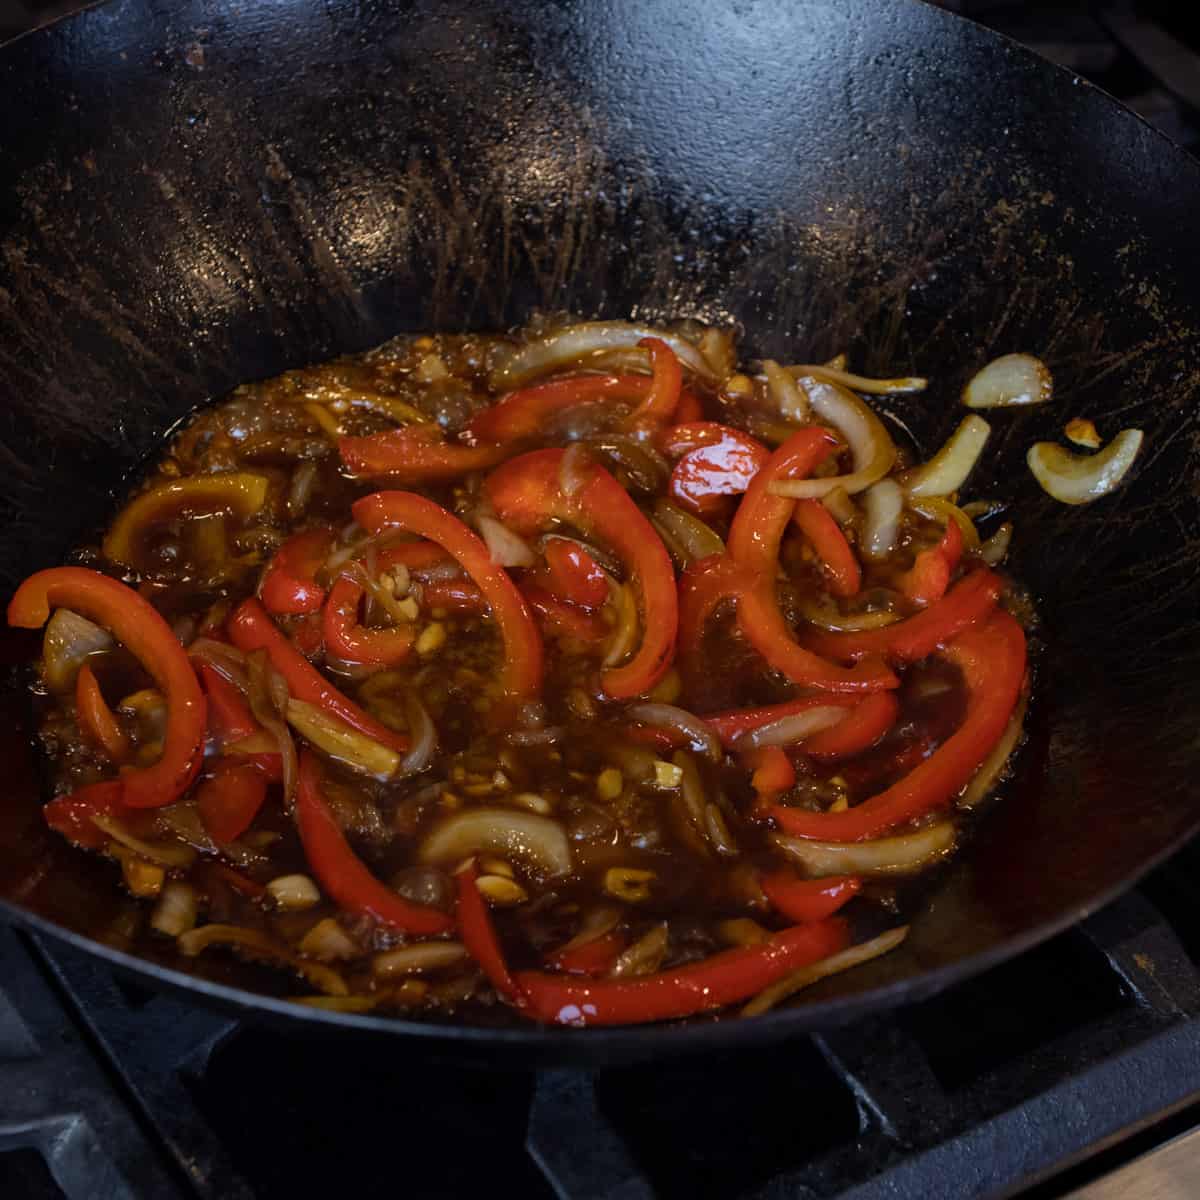 Vegetables and sauce simmering in a wok.